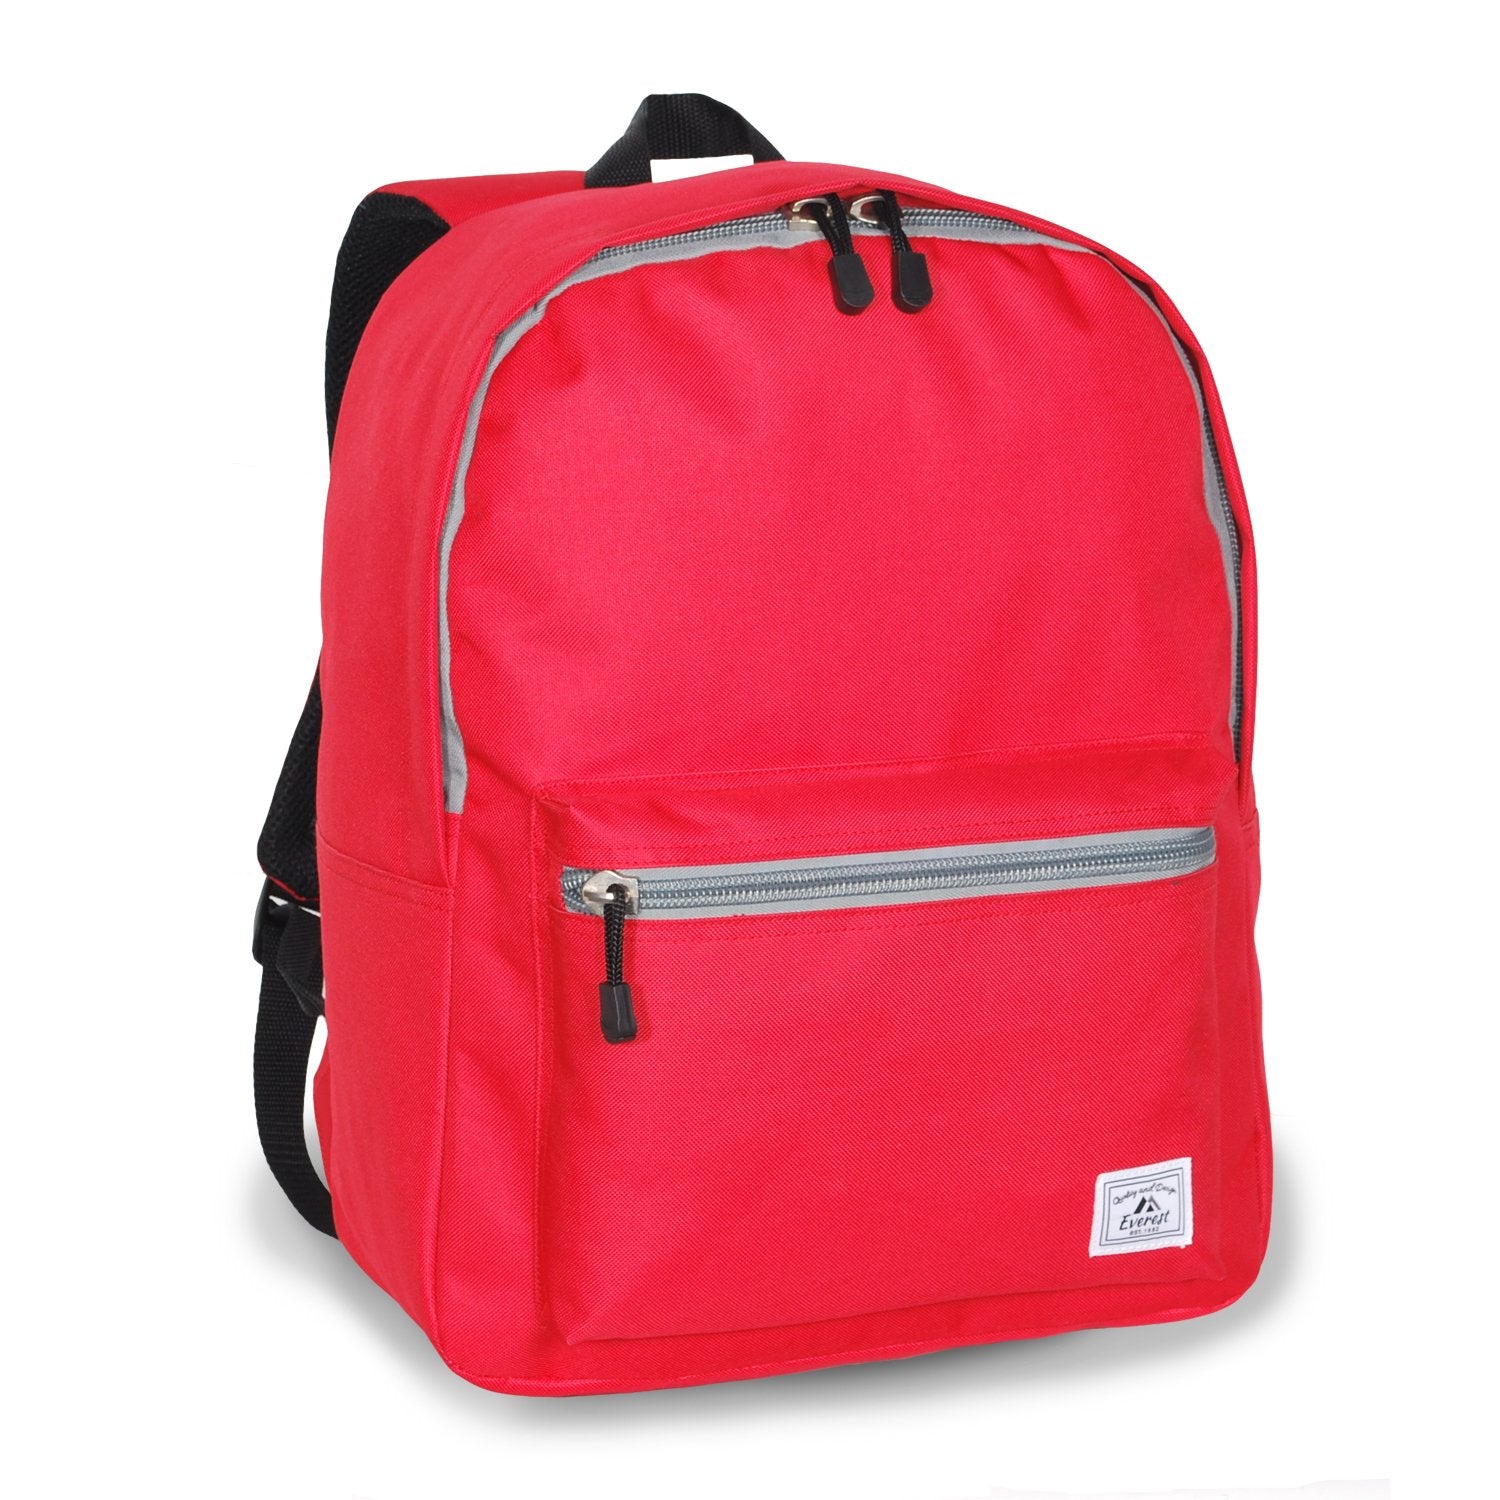 Everest-Deluxe Laptop Backpack-eSafety Supplies, Inc